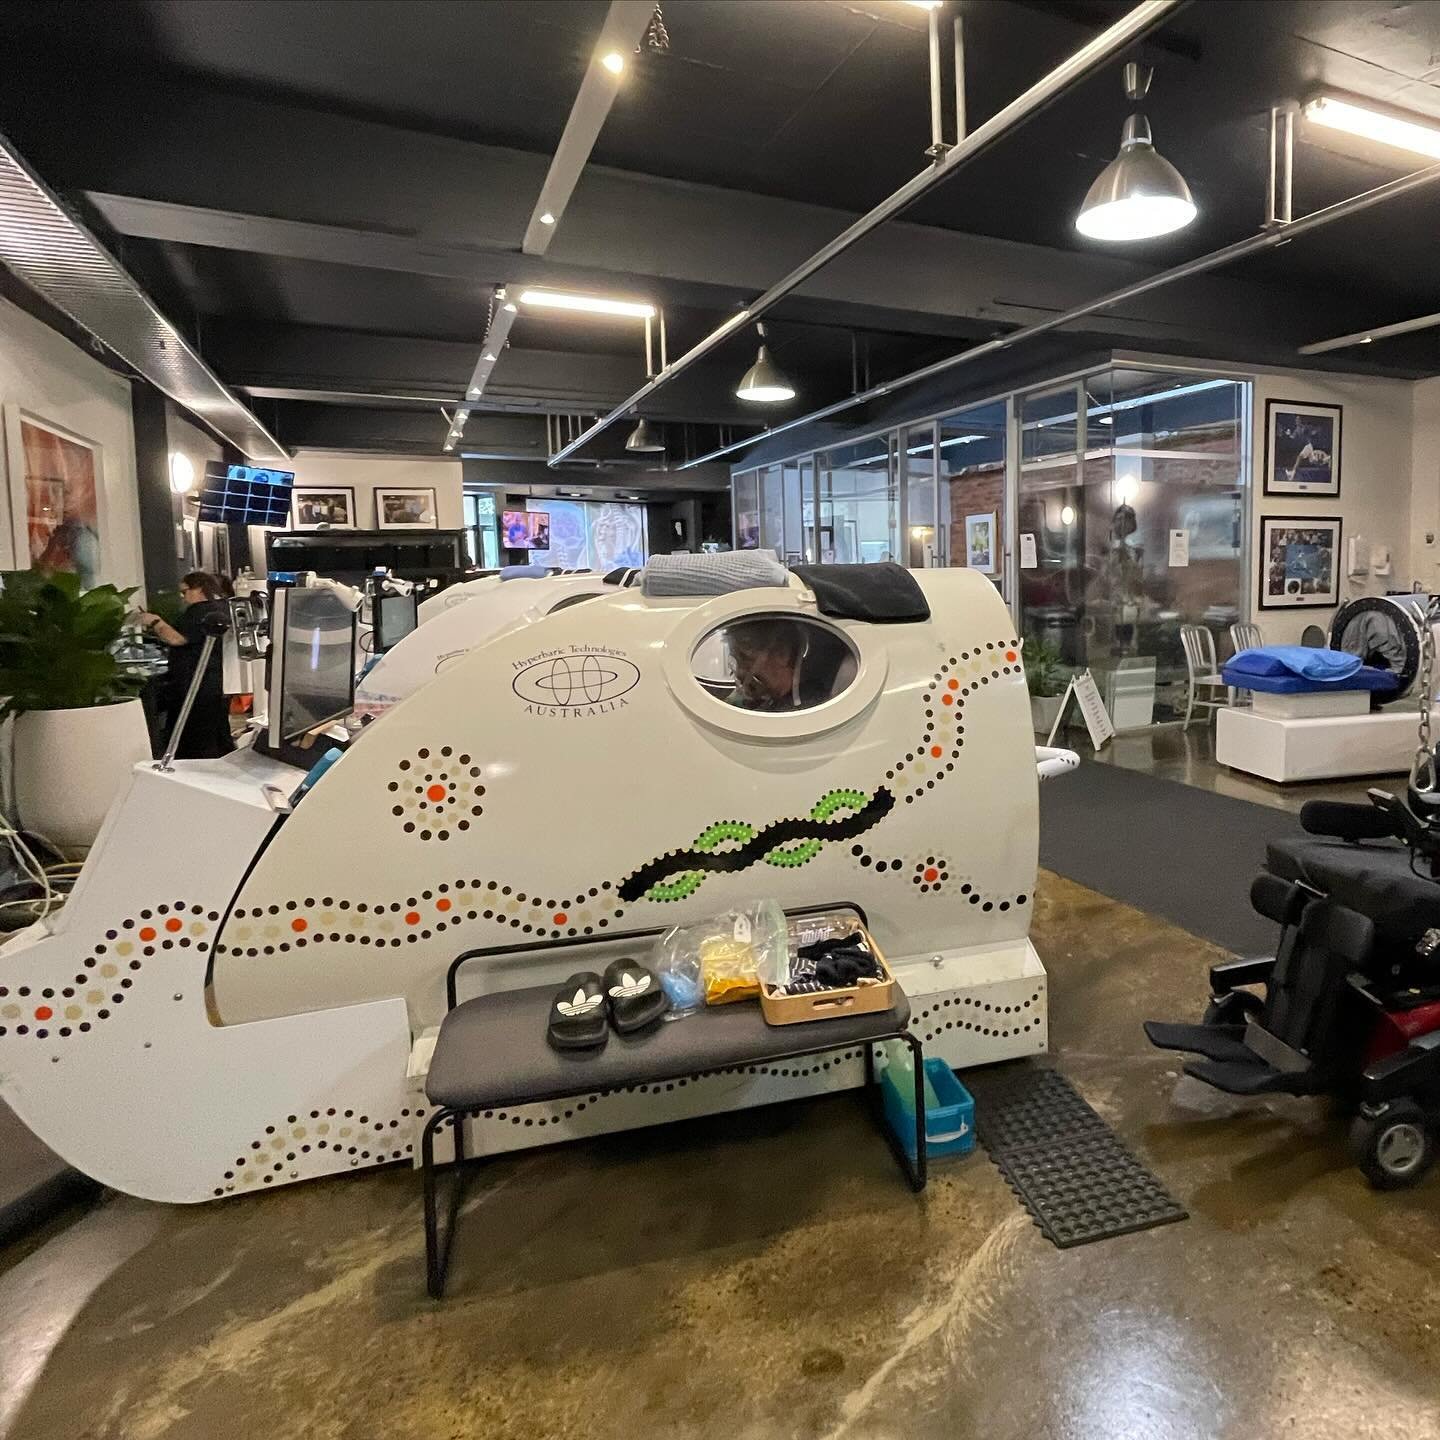 Hyperbaric Oxygen Therapy (HBOT) entails getting into this &lsquo;space ship&rsquo; and breathing 100% oxygen through a mask while the &lsquo;cabin&rsquo; is pressurised - up to 8-10m below sea level. The clinic we go to in Melbourne is one of the fe